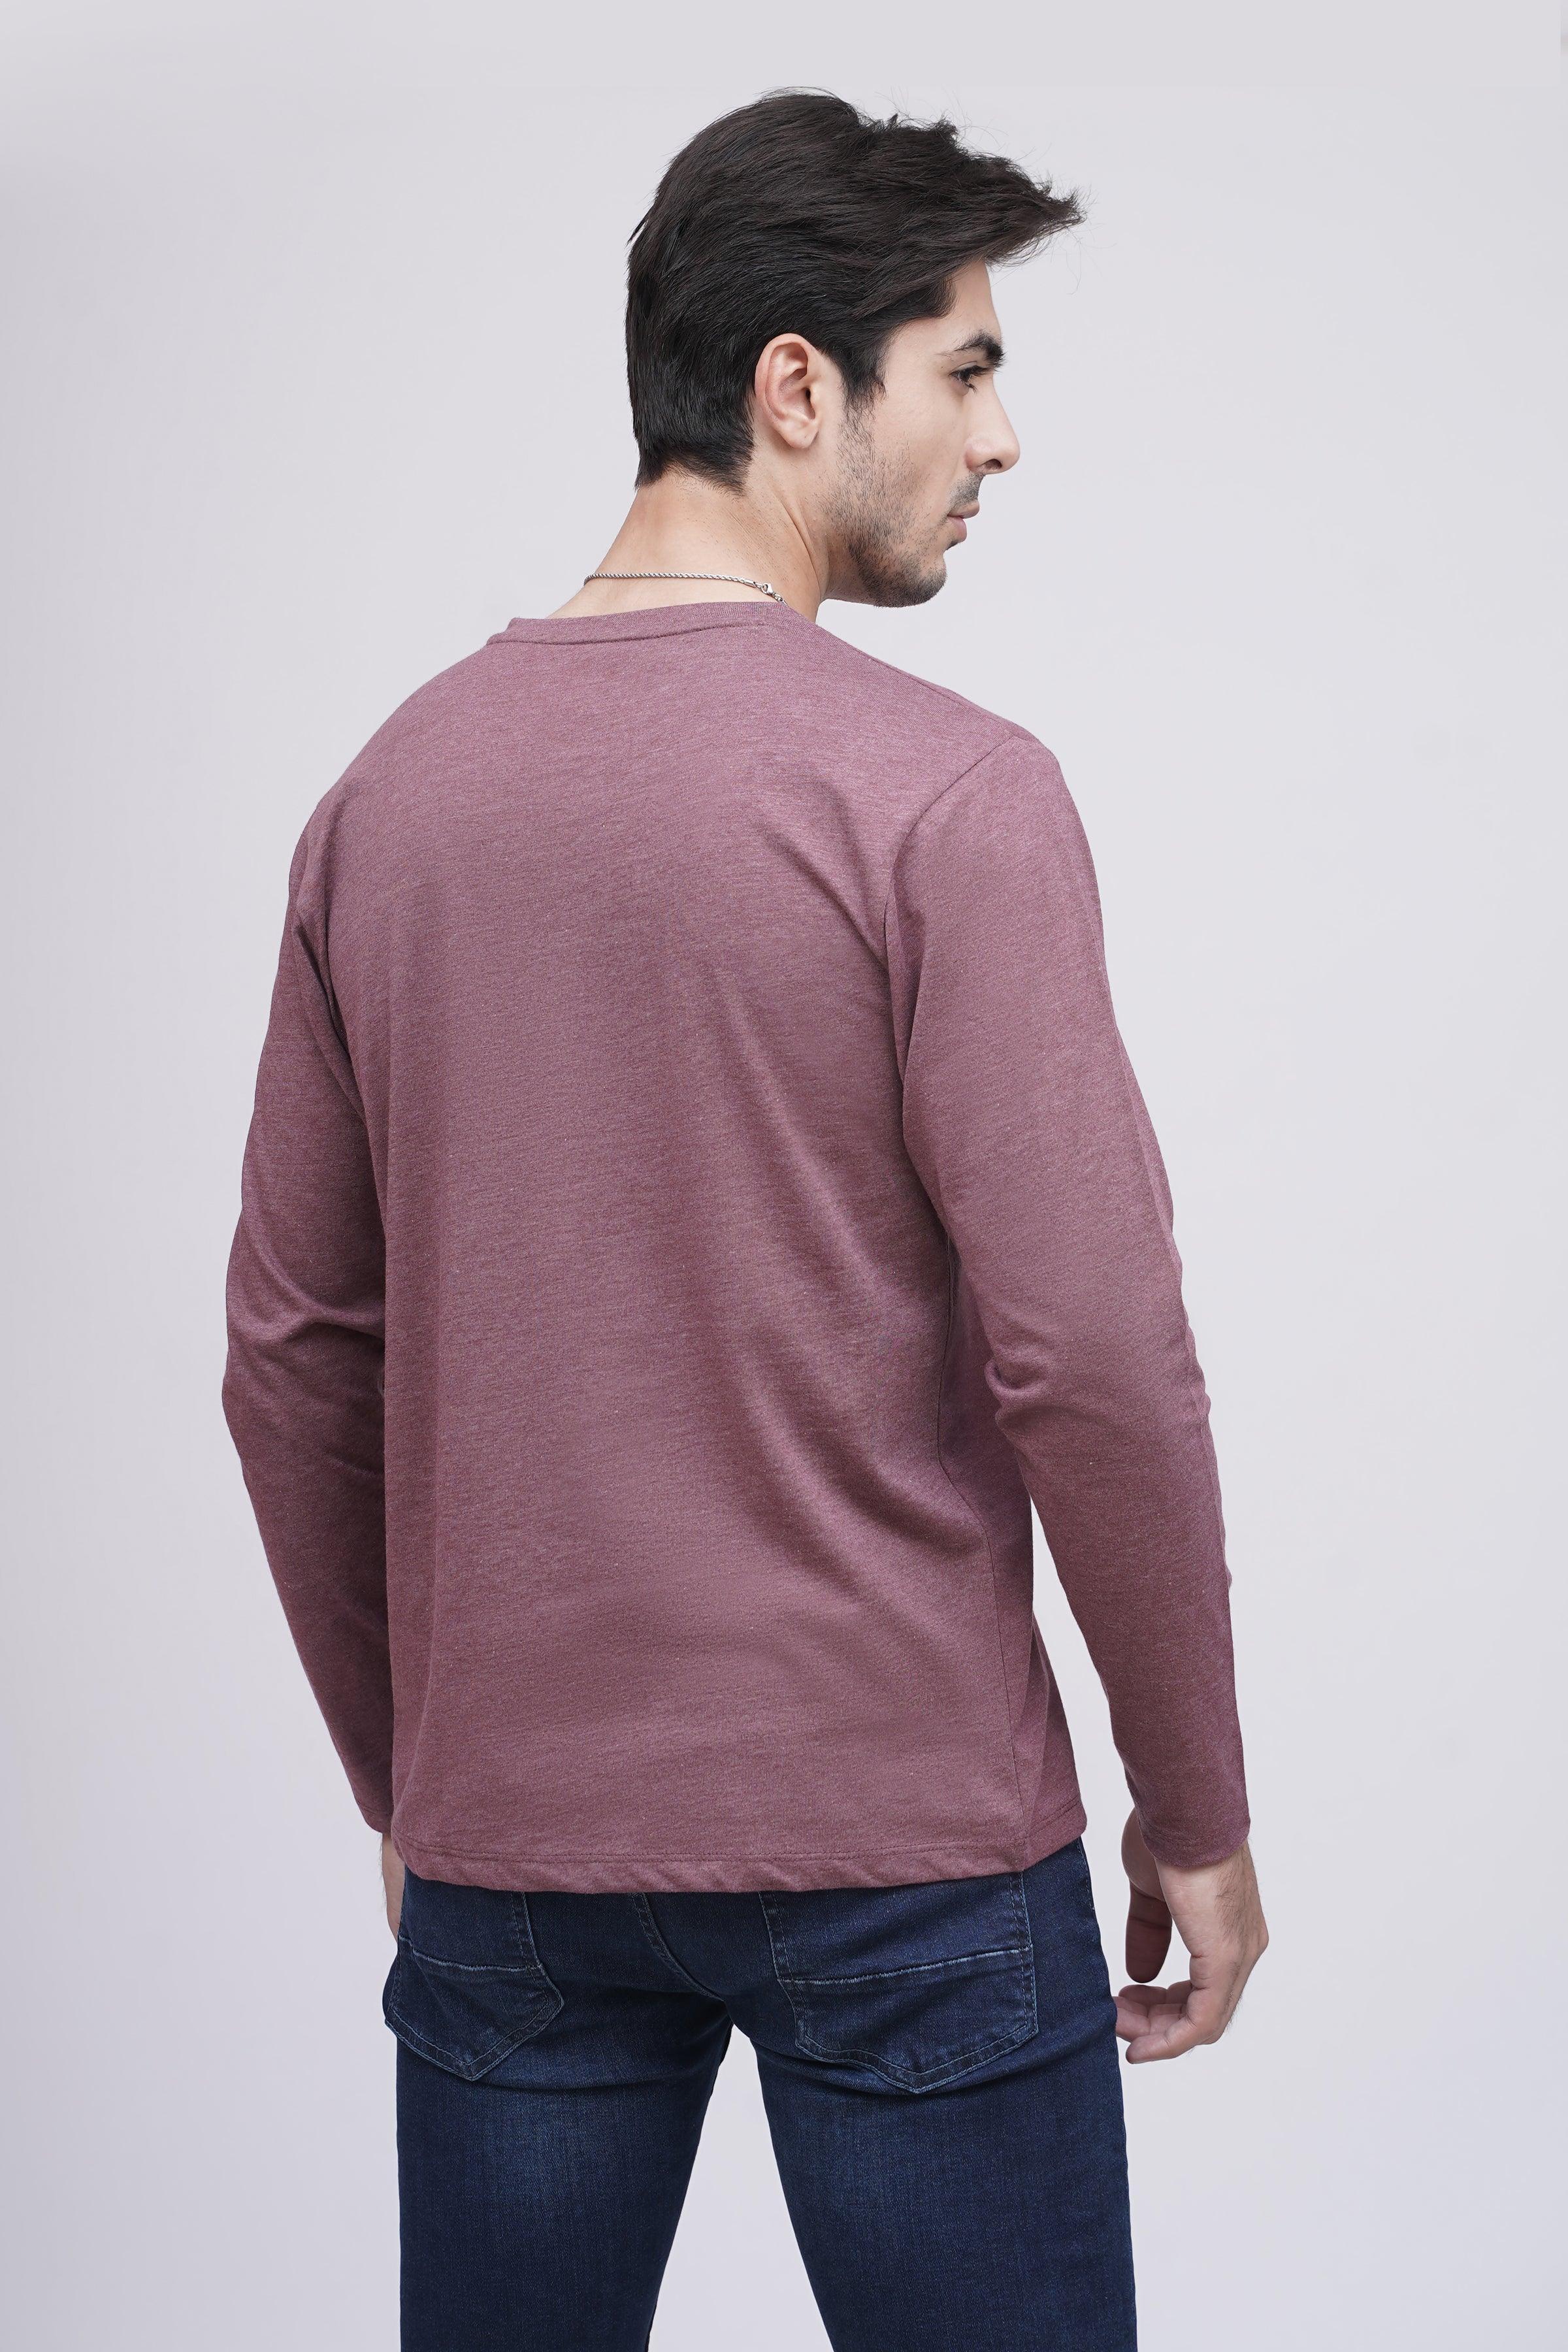 T SHIRT HENLY F/S MAROON MELANGE at Charcoal Clothing